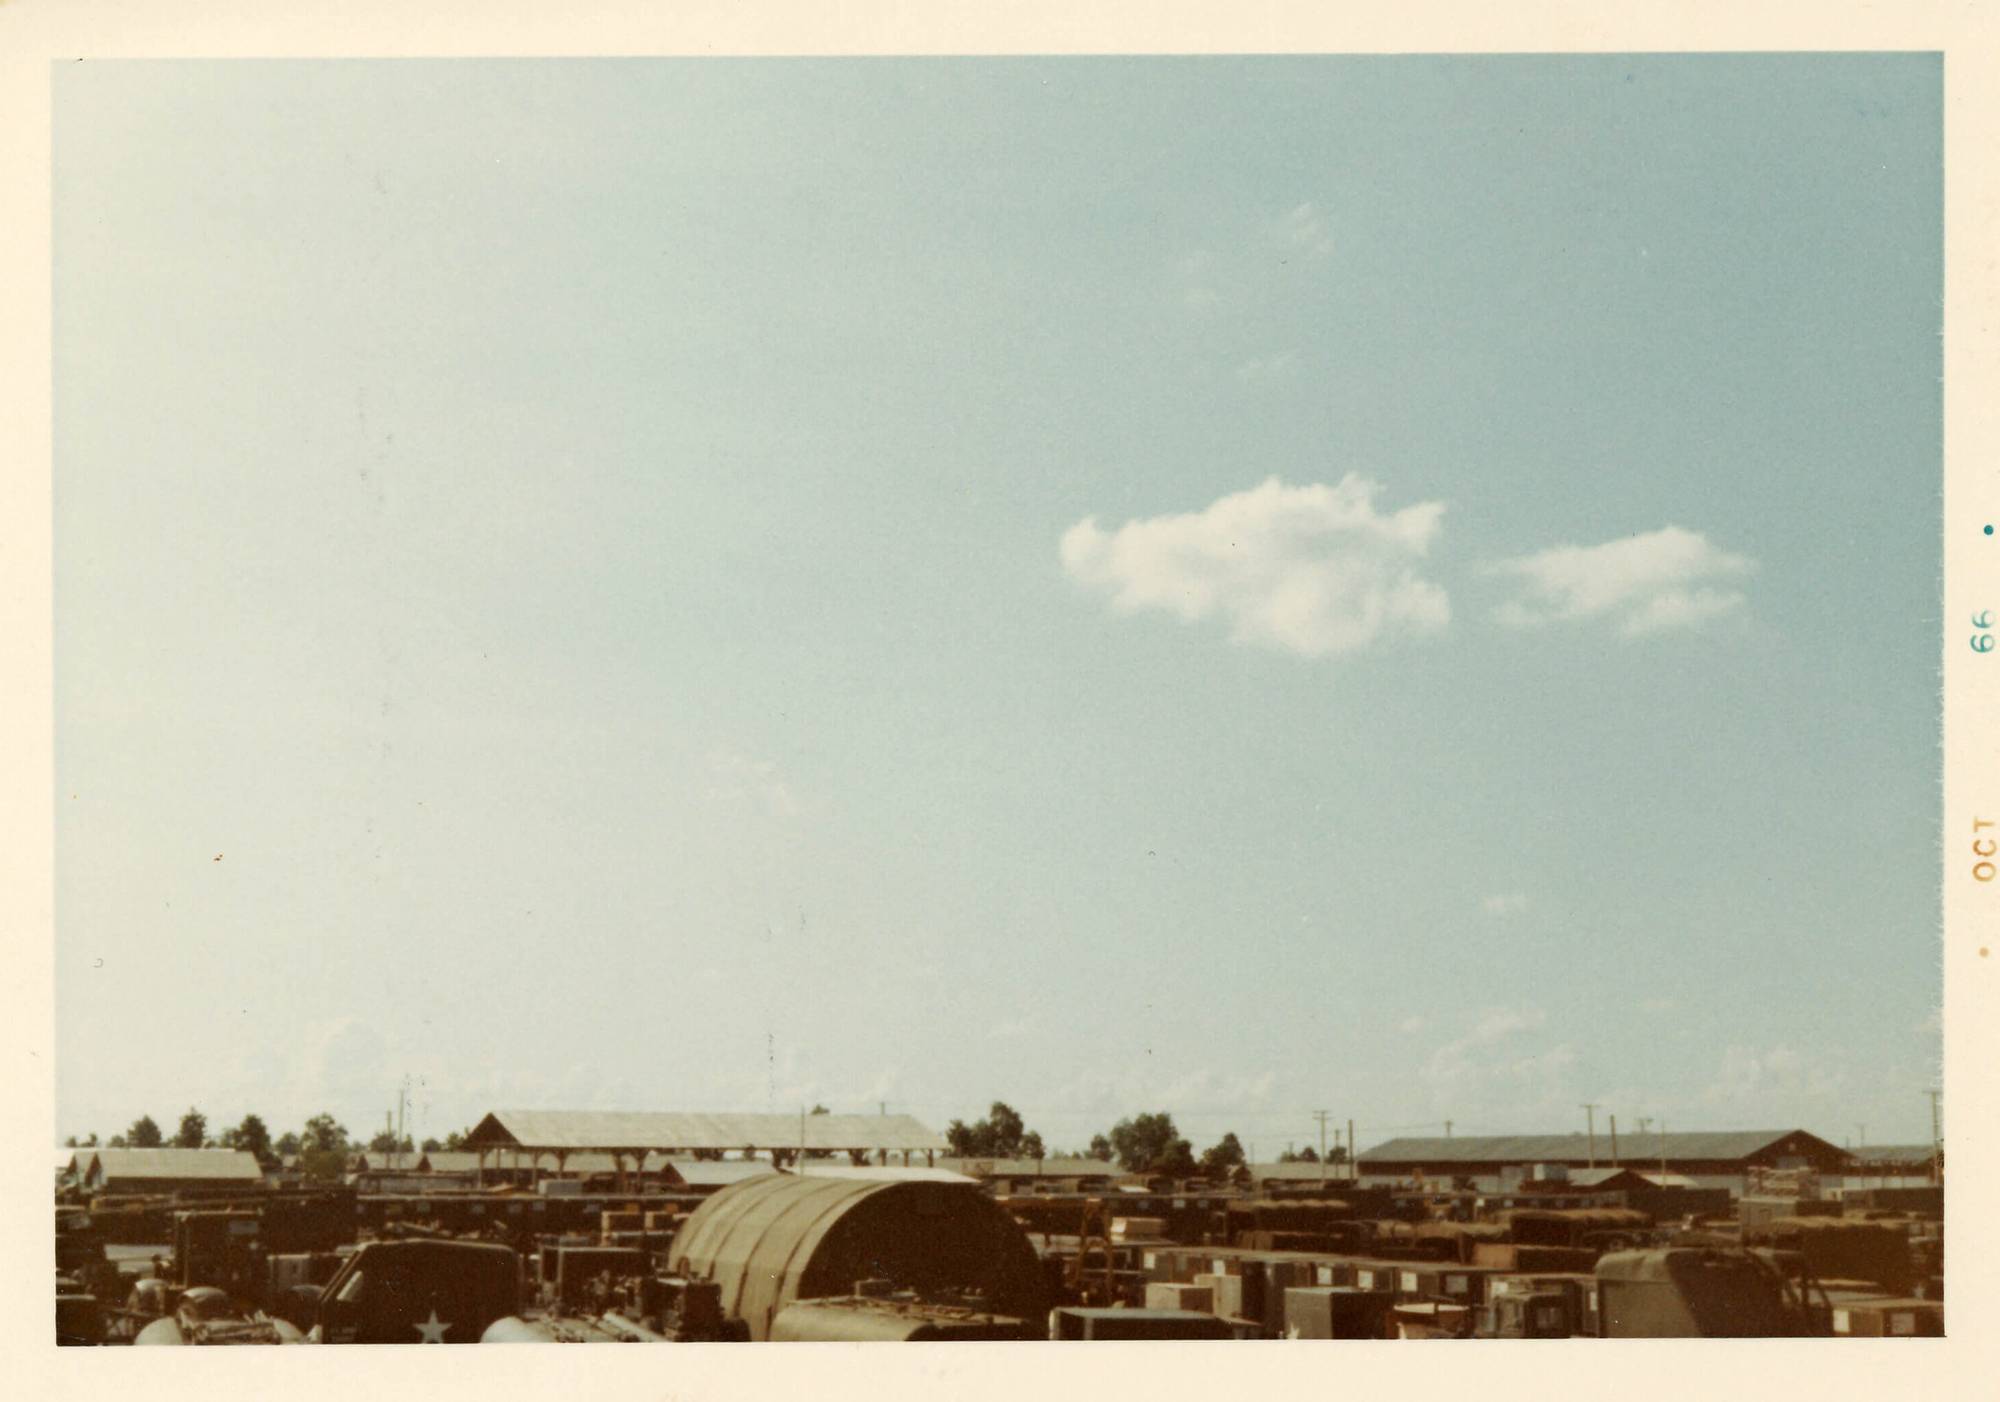 A vast blue sky with a base in the lower fraction of the photo. Margin indicates photo is from Oct 66.